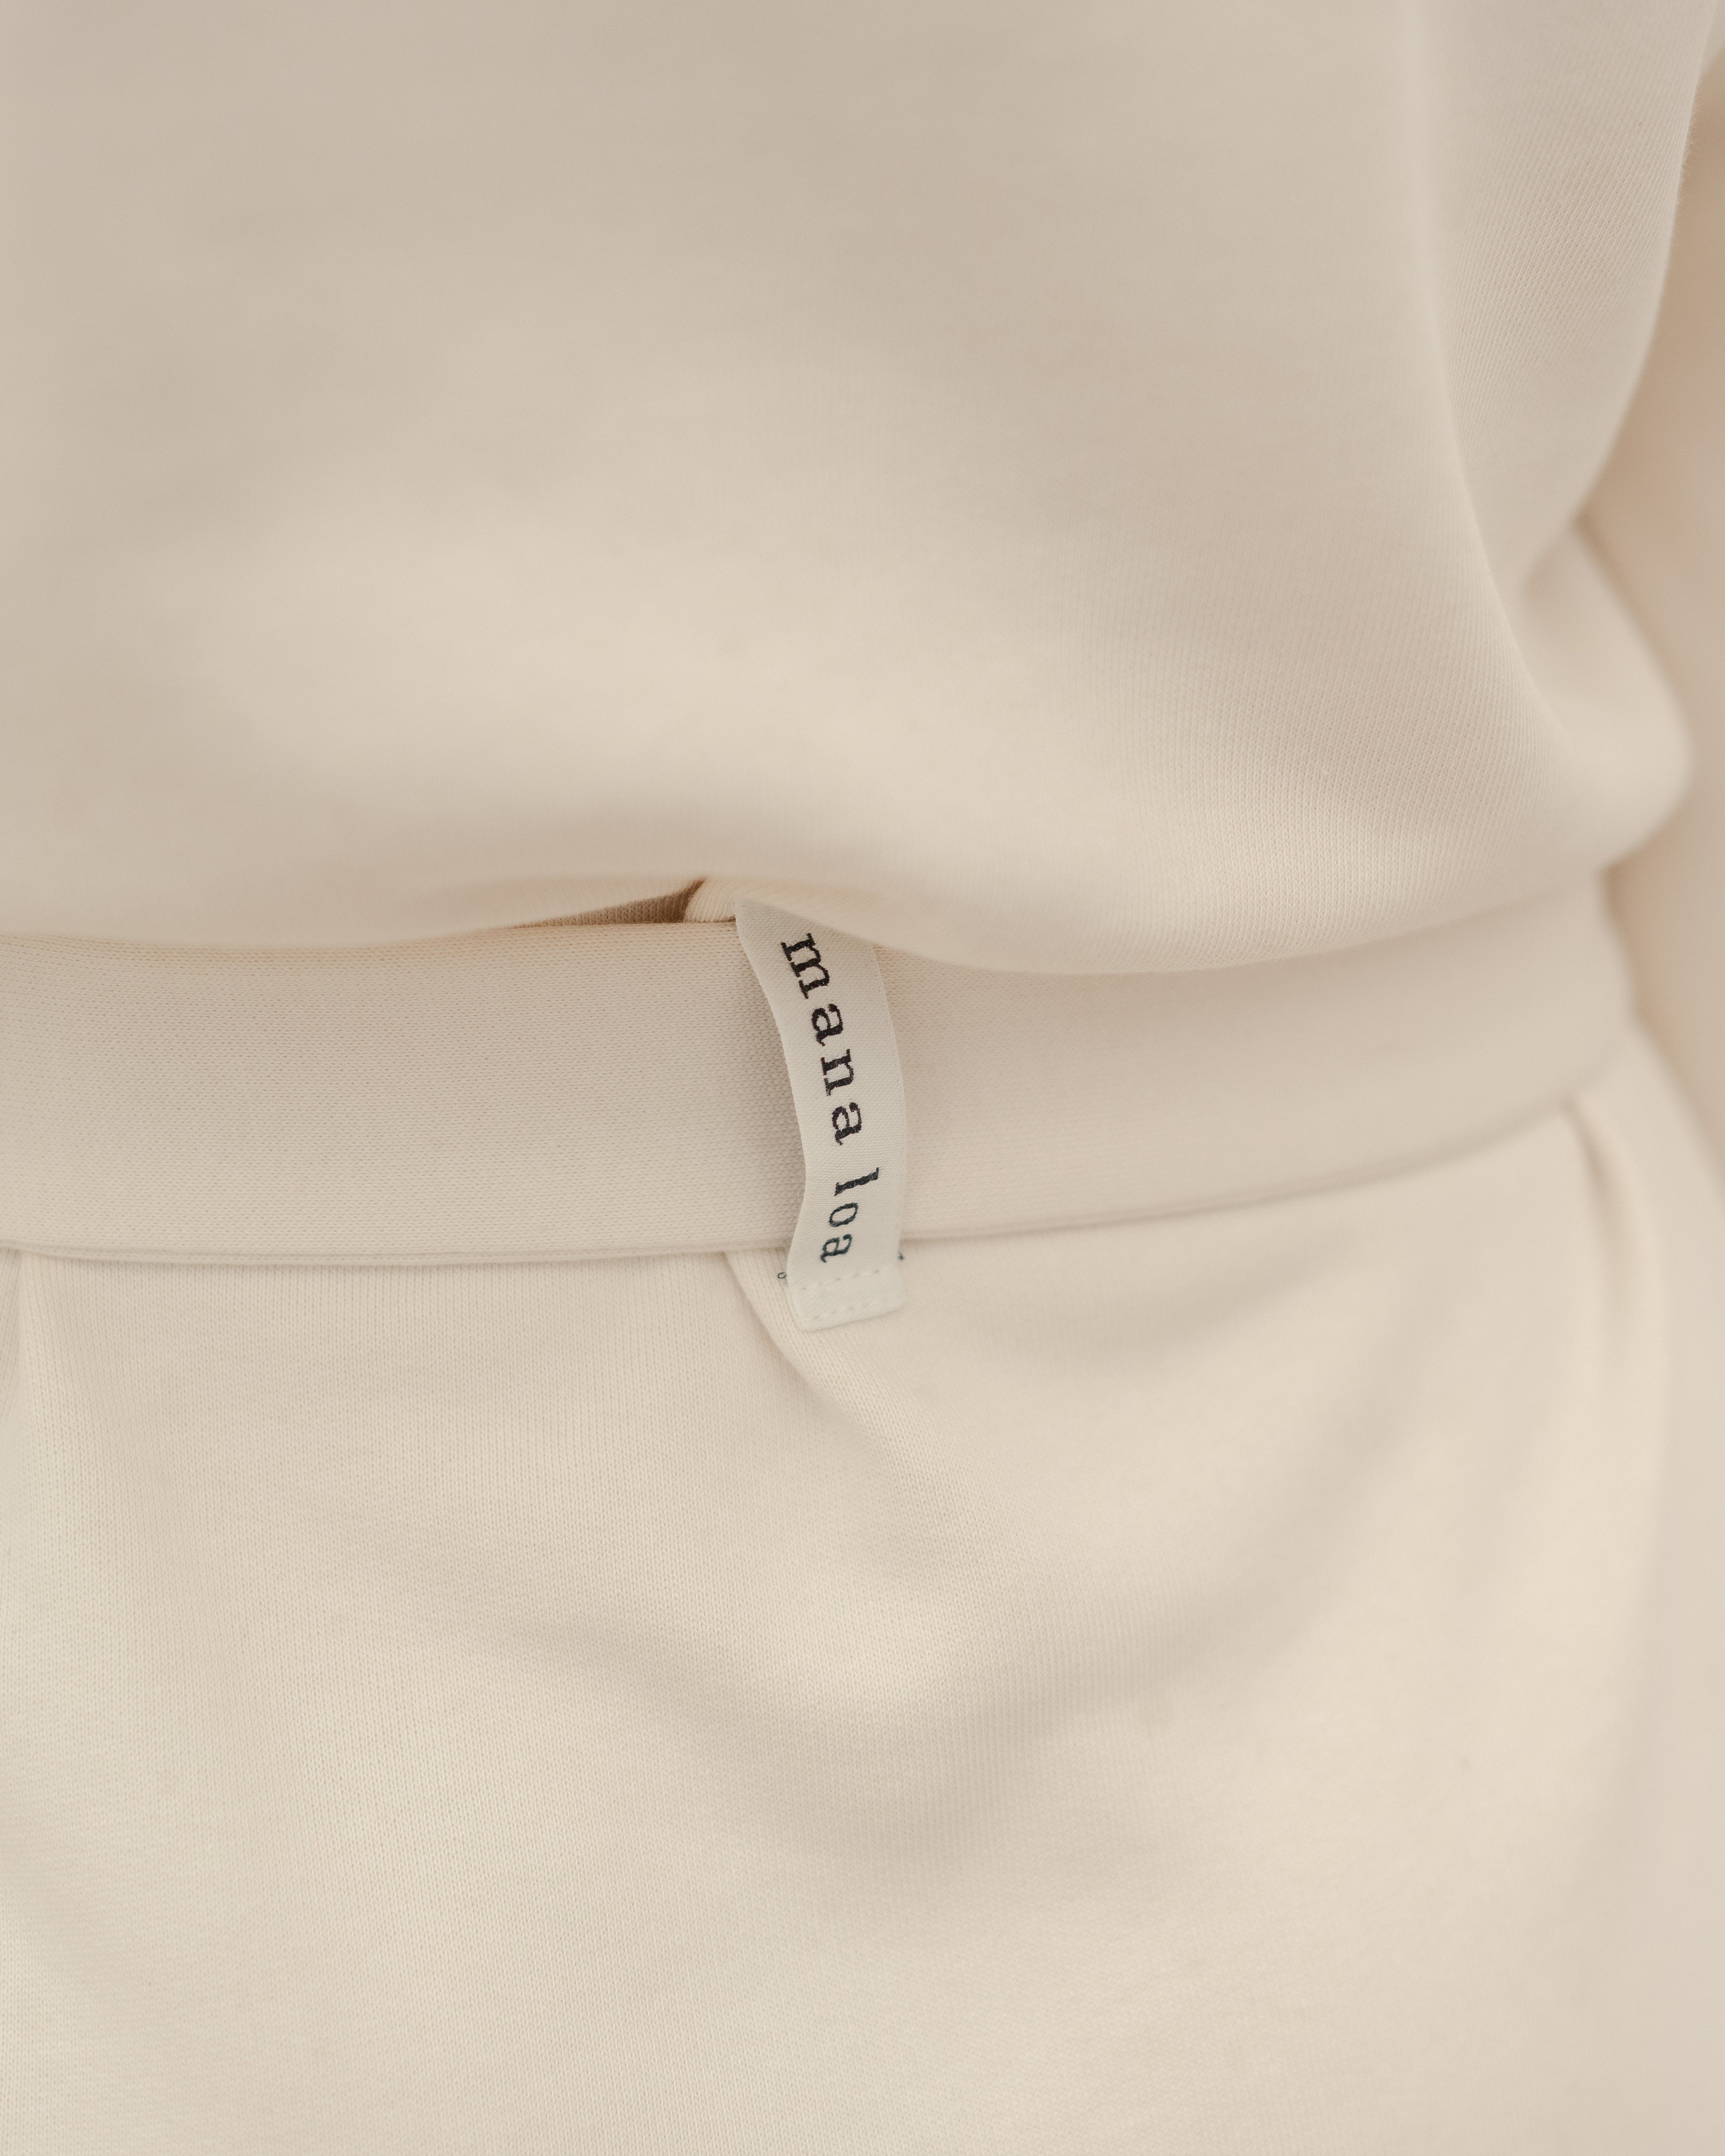 Detail of an ecru cotton dress with belt and mana loa label.